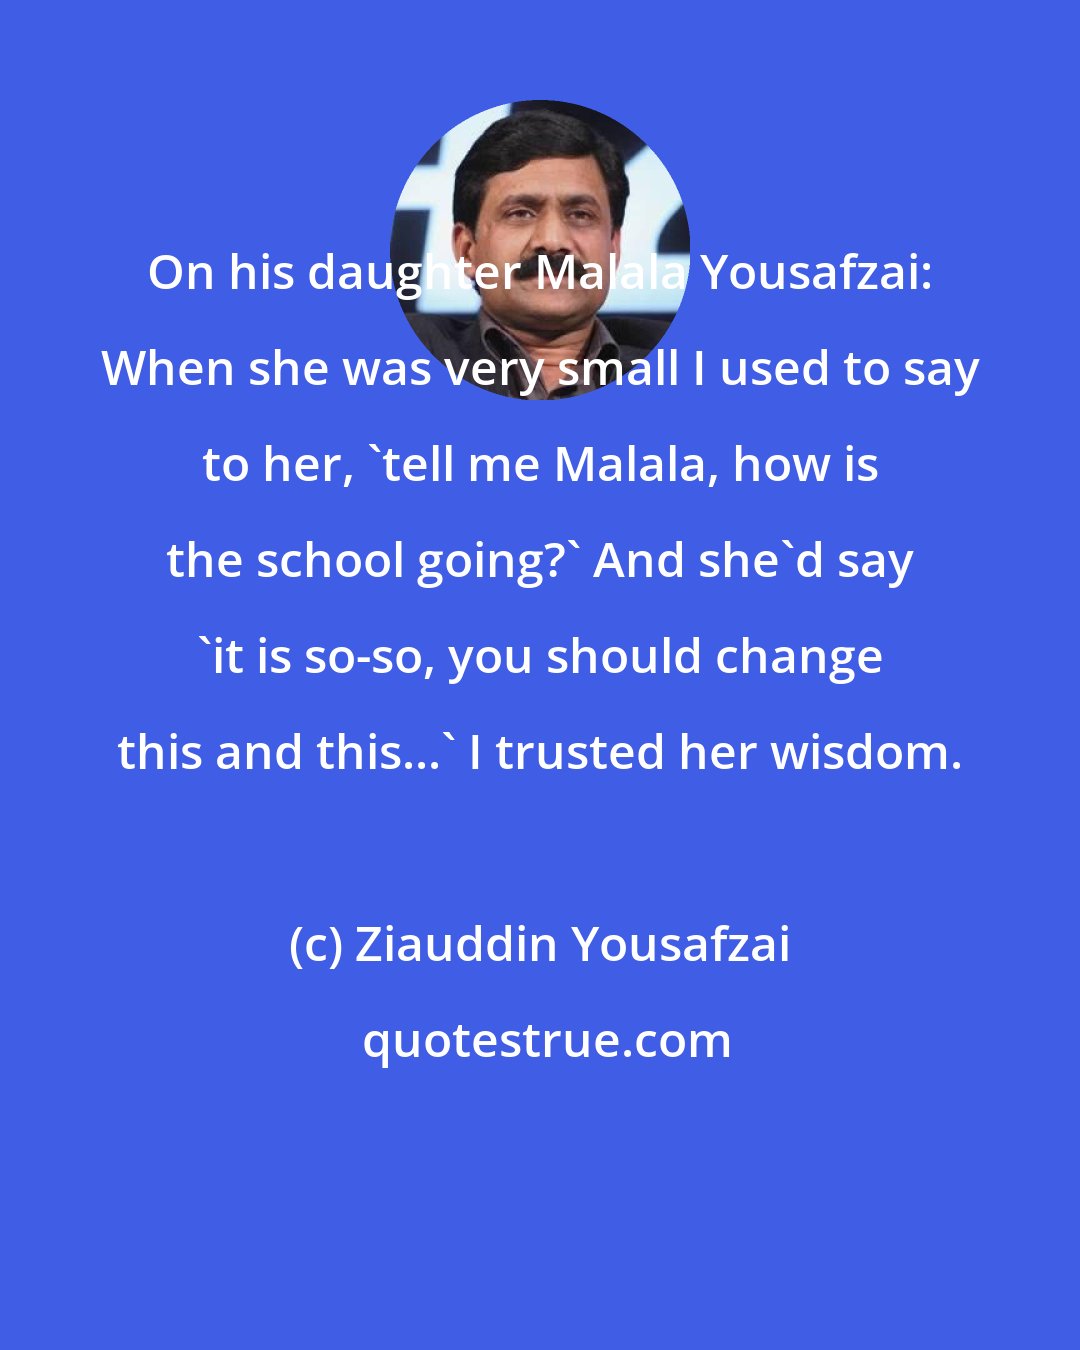 Ziauddin Yousafzai: On his daughter Malala Yousafzai: When she was very small I used to say to her, 'tell me Malala, how is the school going?' And she'd say 'it is so-so, you should change this and this...' I trusted her wisdom.